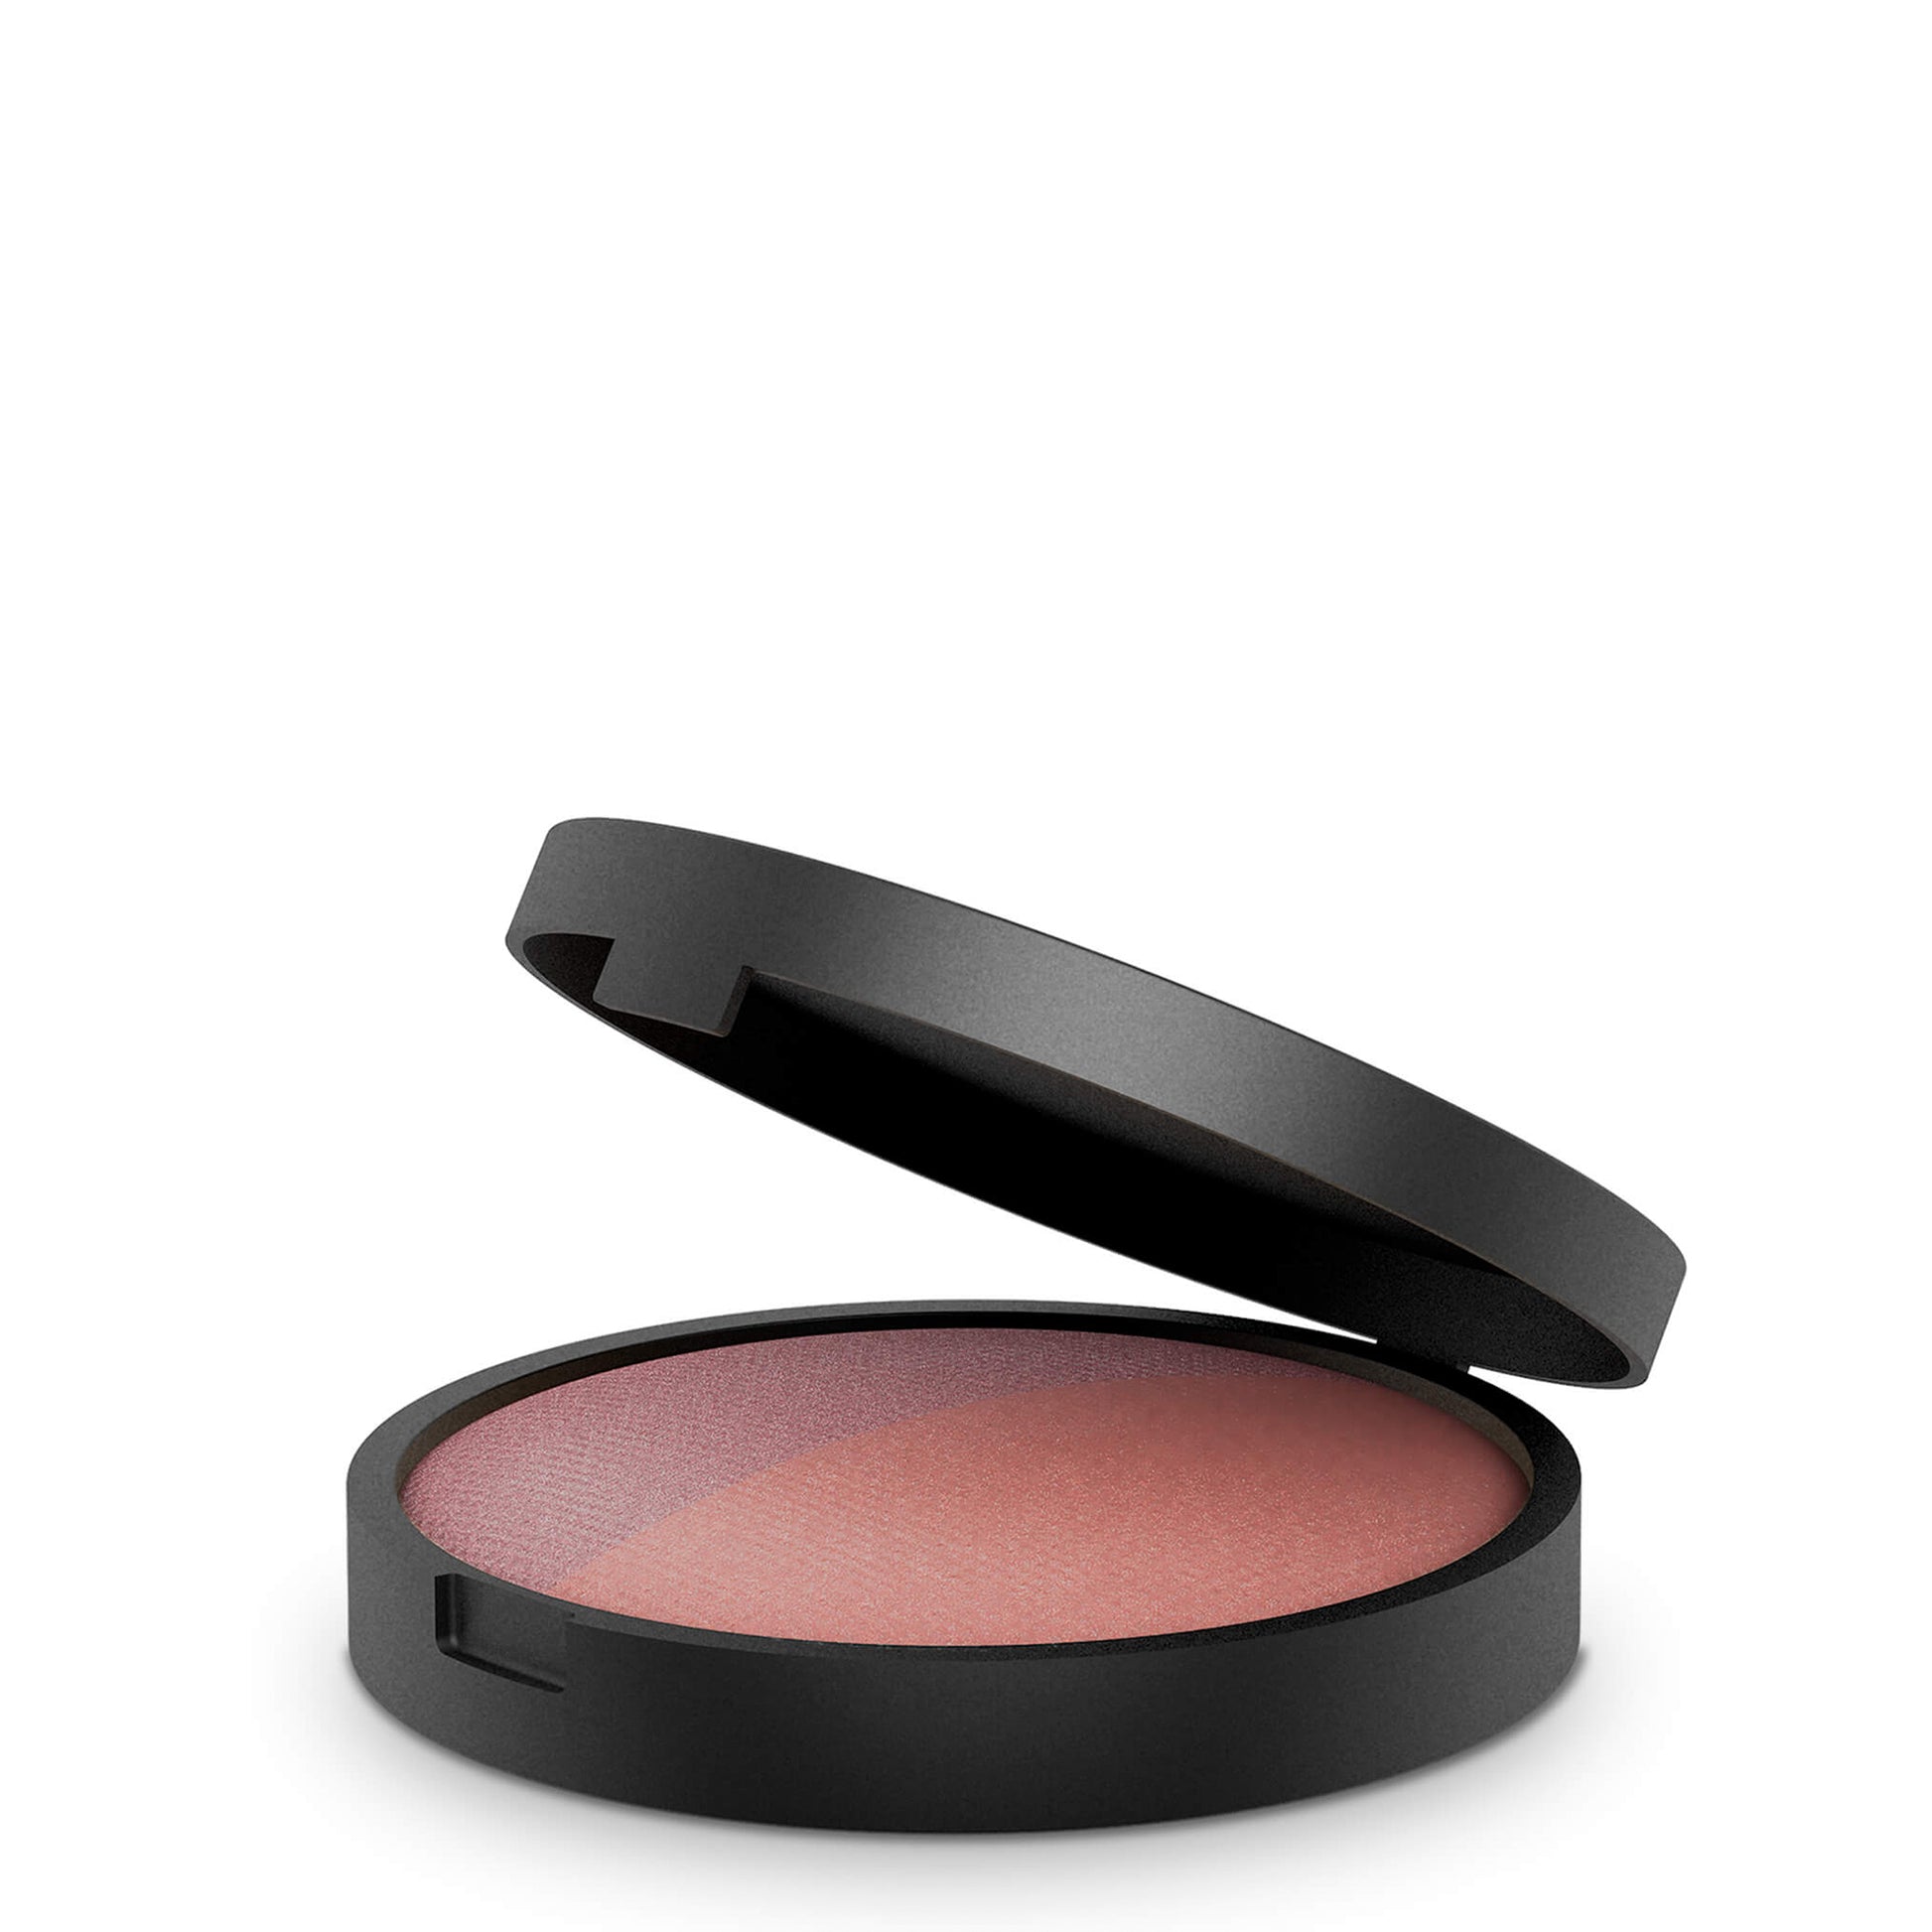 Mineral Baked Blush Duo (Pink Tickle) | INIKA Organic | 02